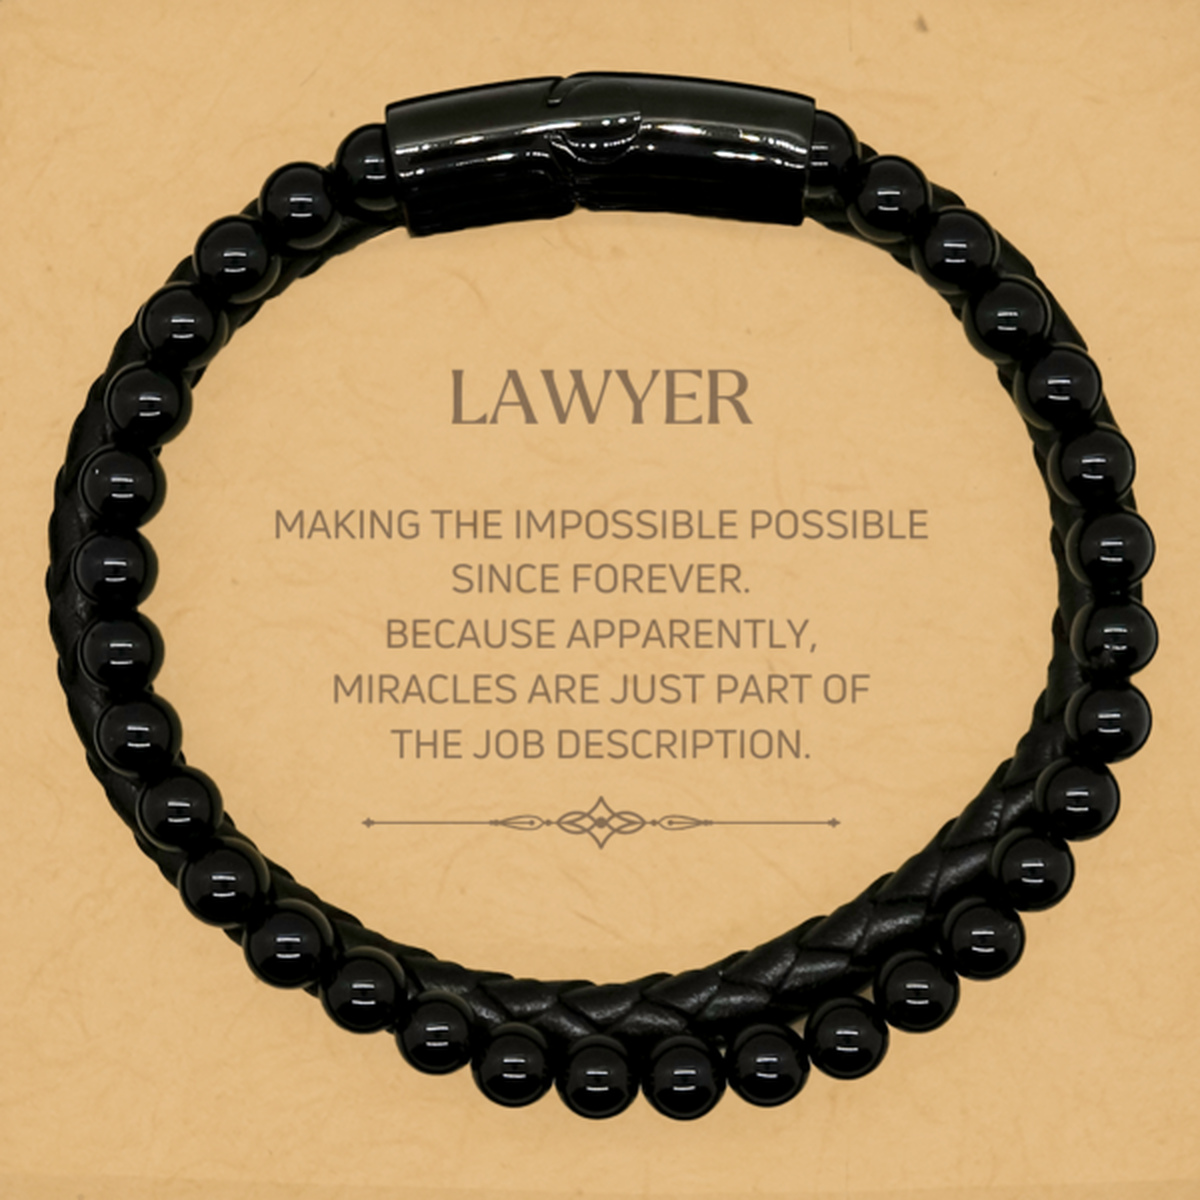 Funny Lawyer Gifts, Miracles are just part of the job description, Inspirational Birthday Stone Leather Bracelets For Lawyer, Men, Women, Coworkers, Friends, Boss